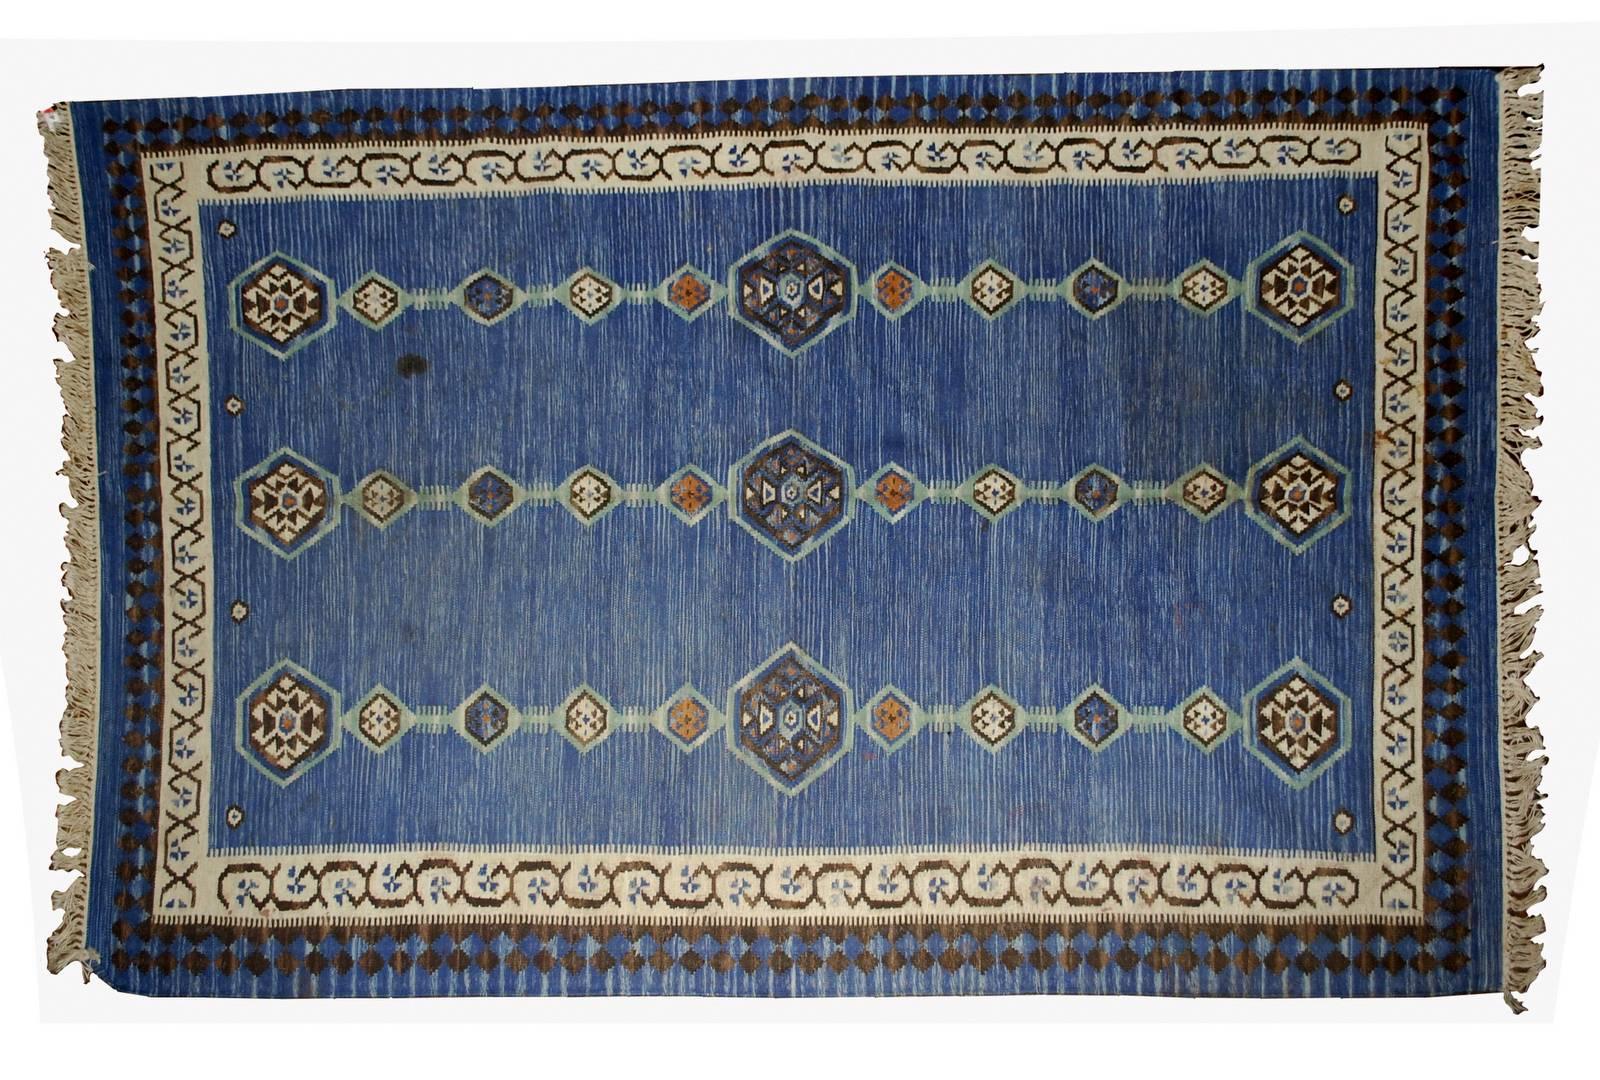 Antique handmade Indian Dhurri Kilim in original condition. This Kilim has very simple tribal motive in lines with decorative border. The rug is in blue shade with beige border. It is in original good condition.
 